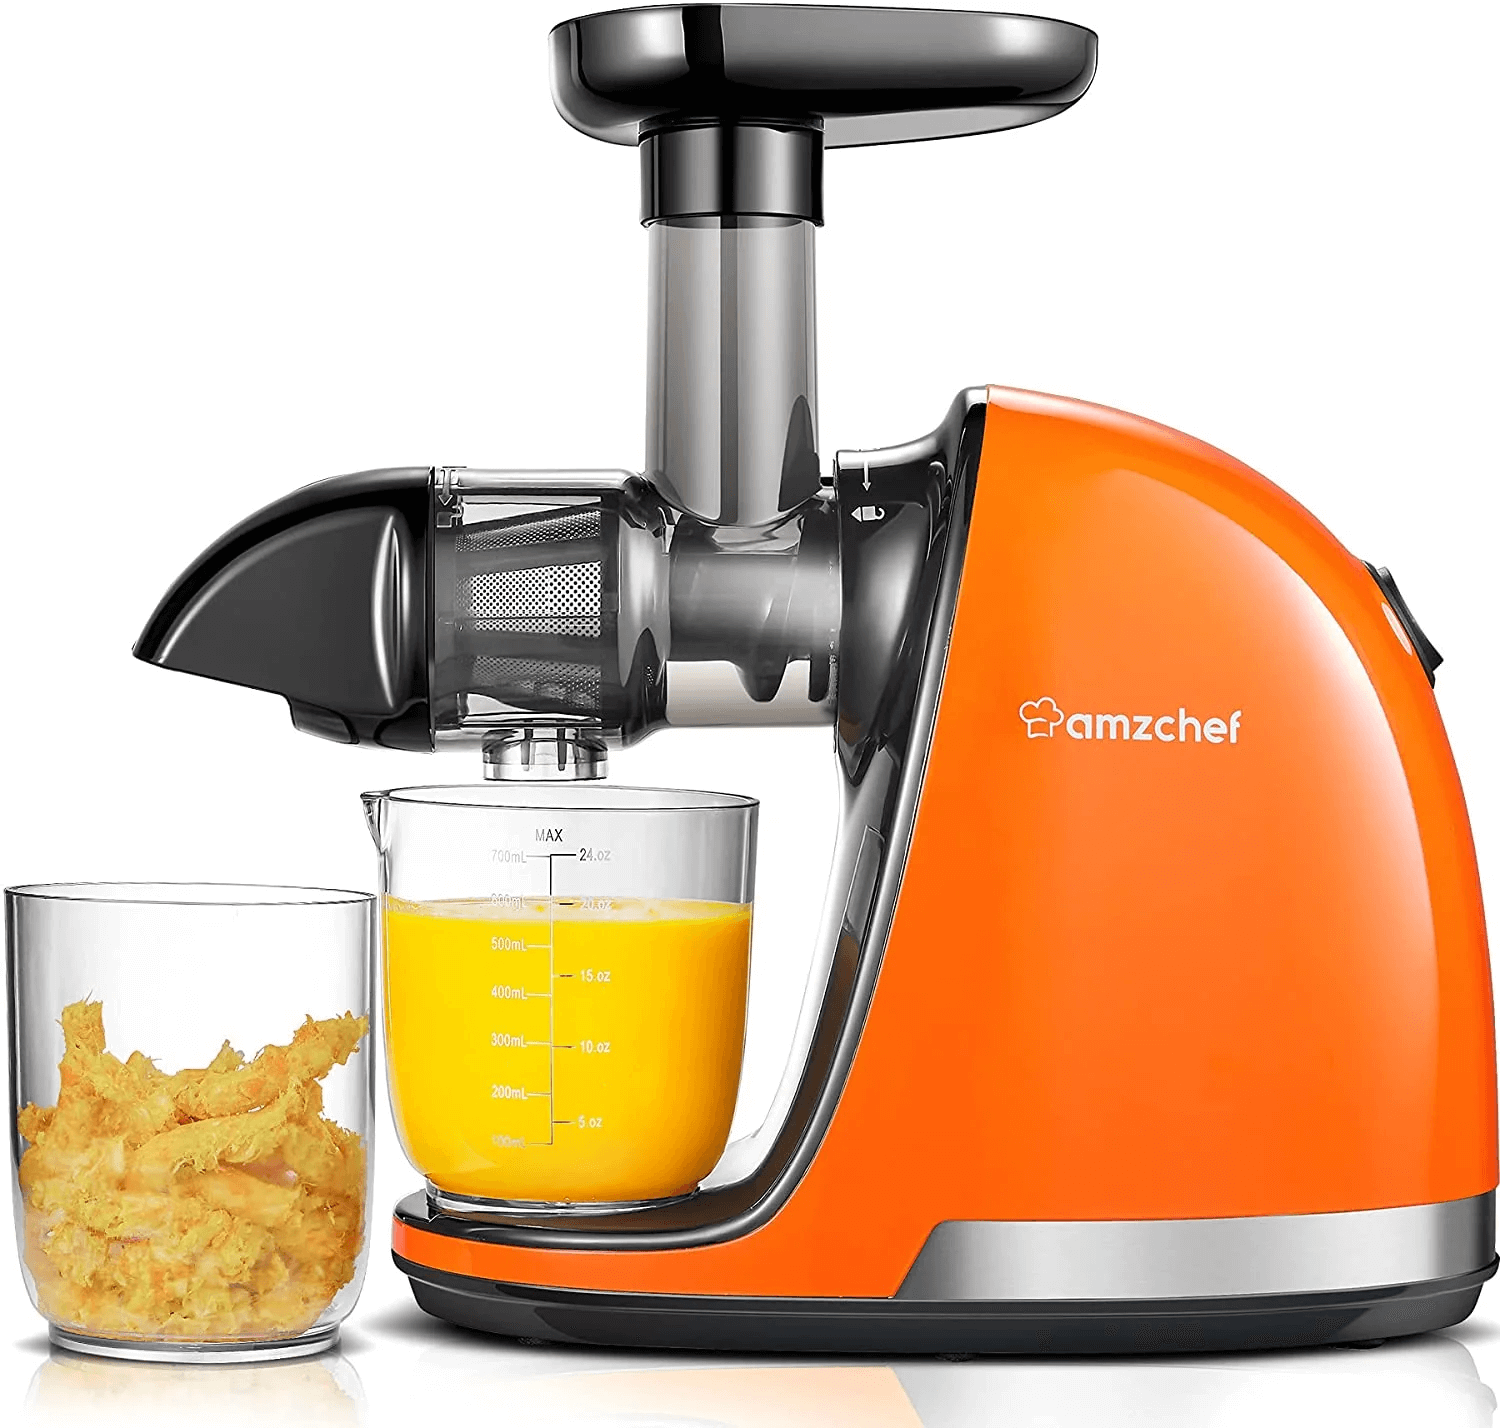 Discover the Amzchef Slow Juicer ZM1501, our top pick for the juicer, delivering maximum nutrition and superior taste. Perfect for health enthusiasts craving for the purest juice extraction. This product our picks for juicer